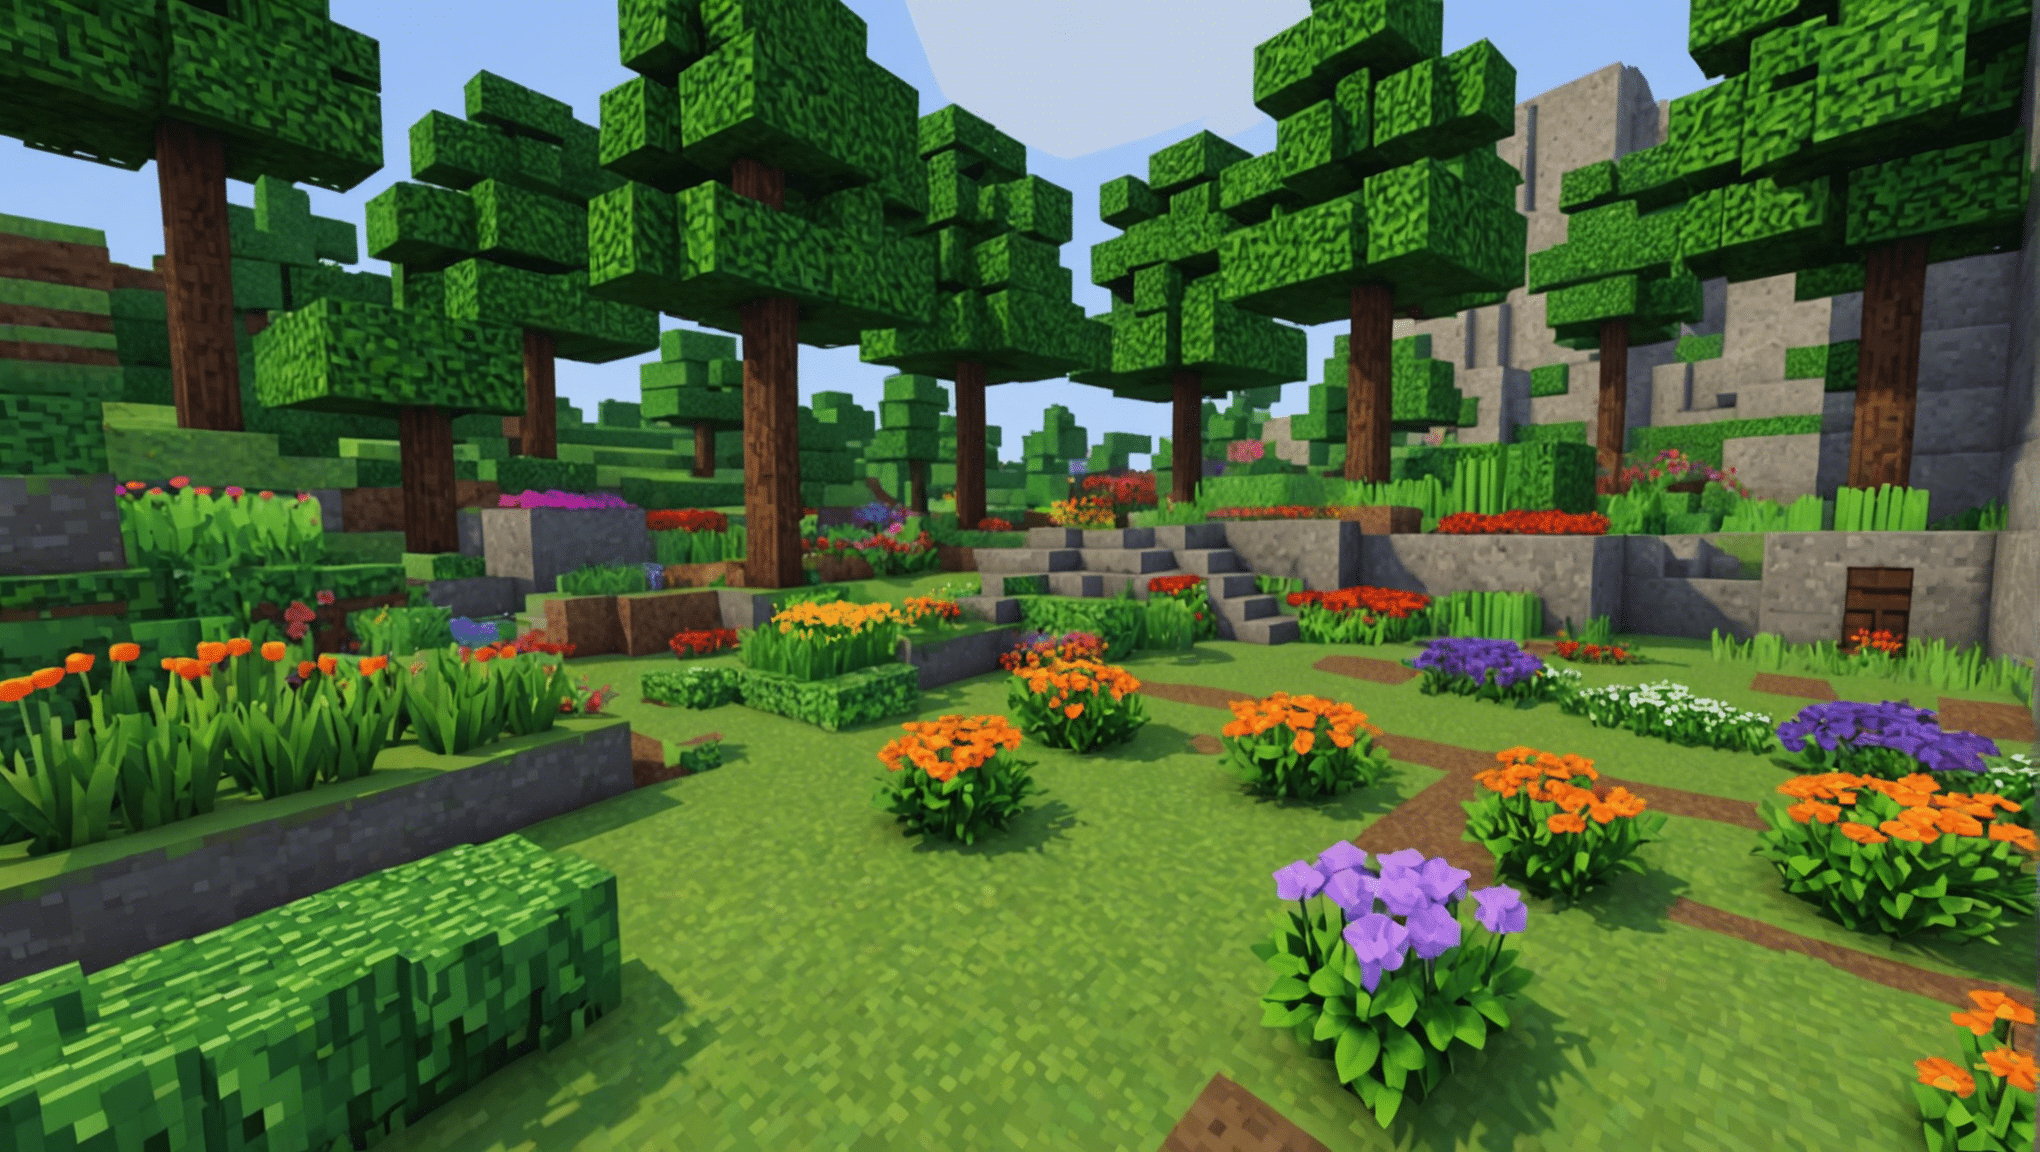 discover the top bedrock seeds and explore a world of endless possibilities with the best bedrock seeds for minecraft.